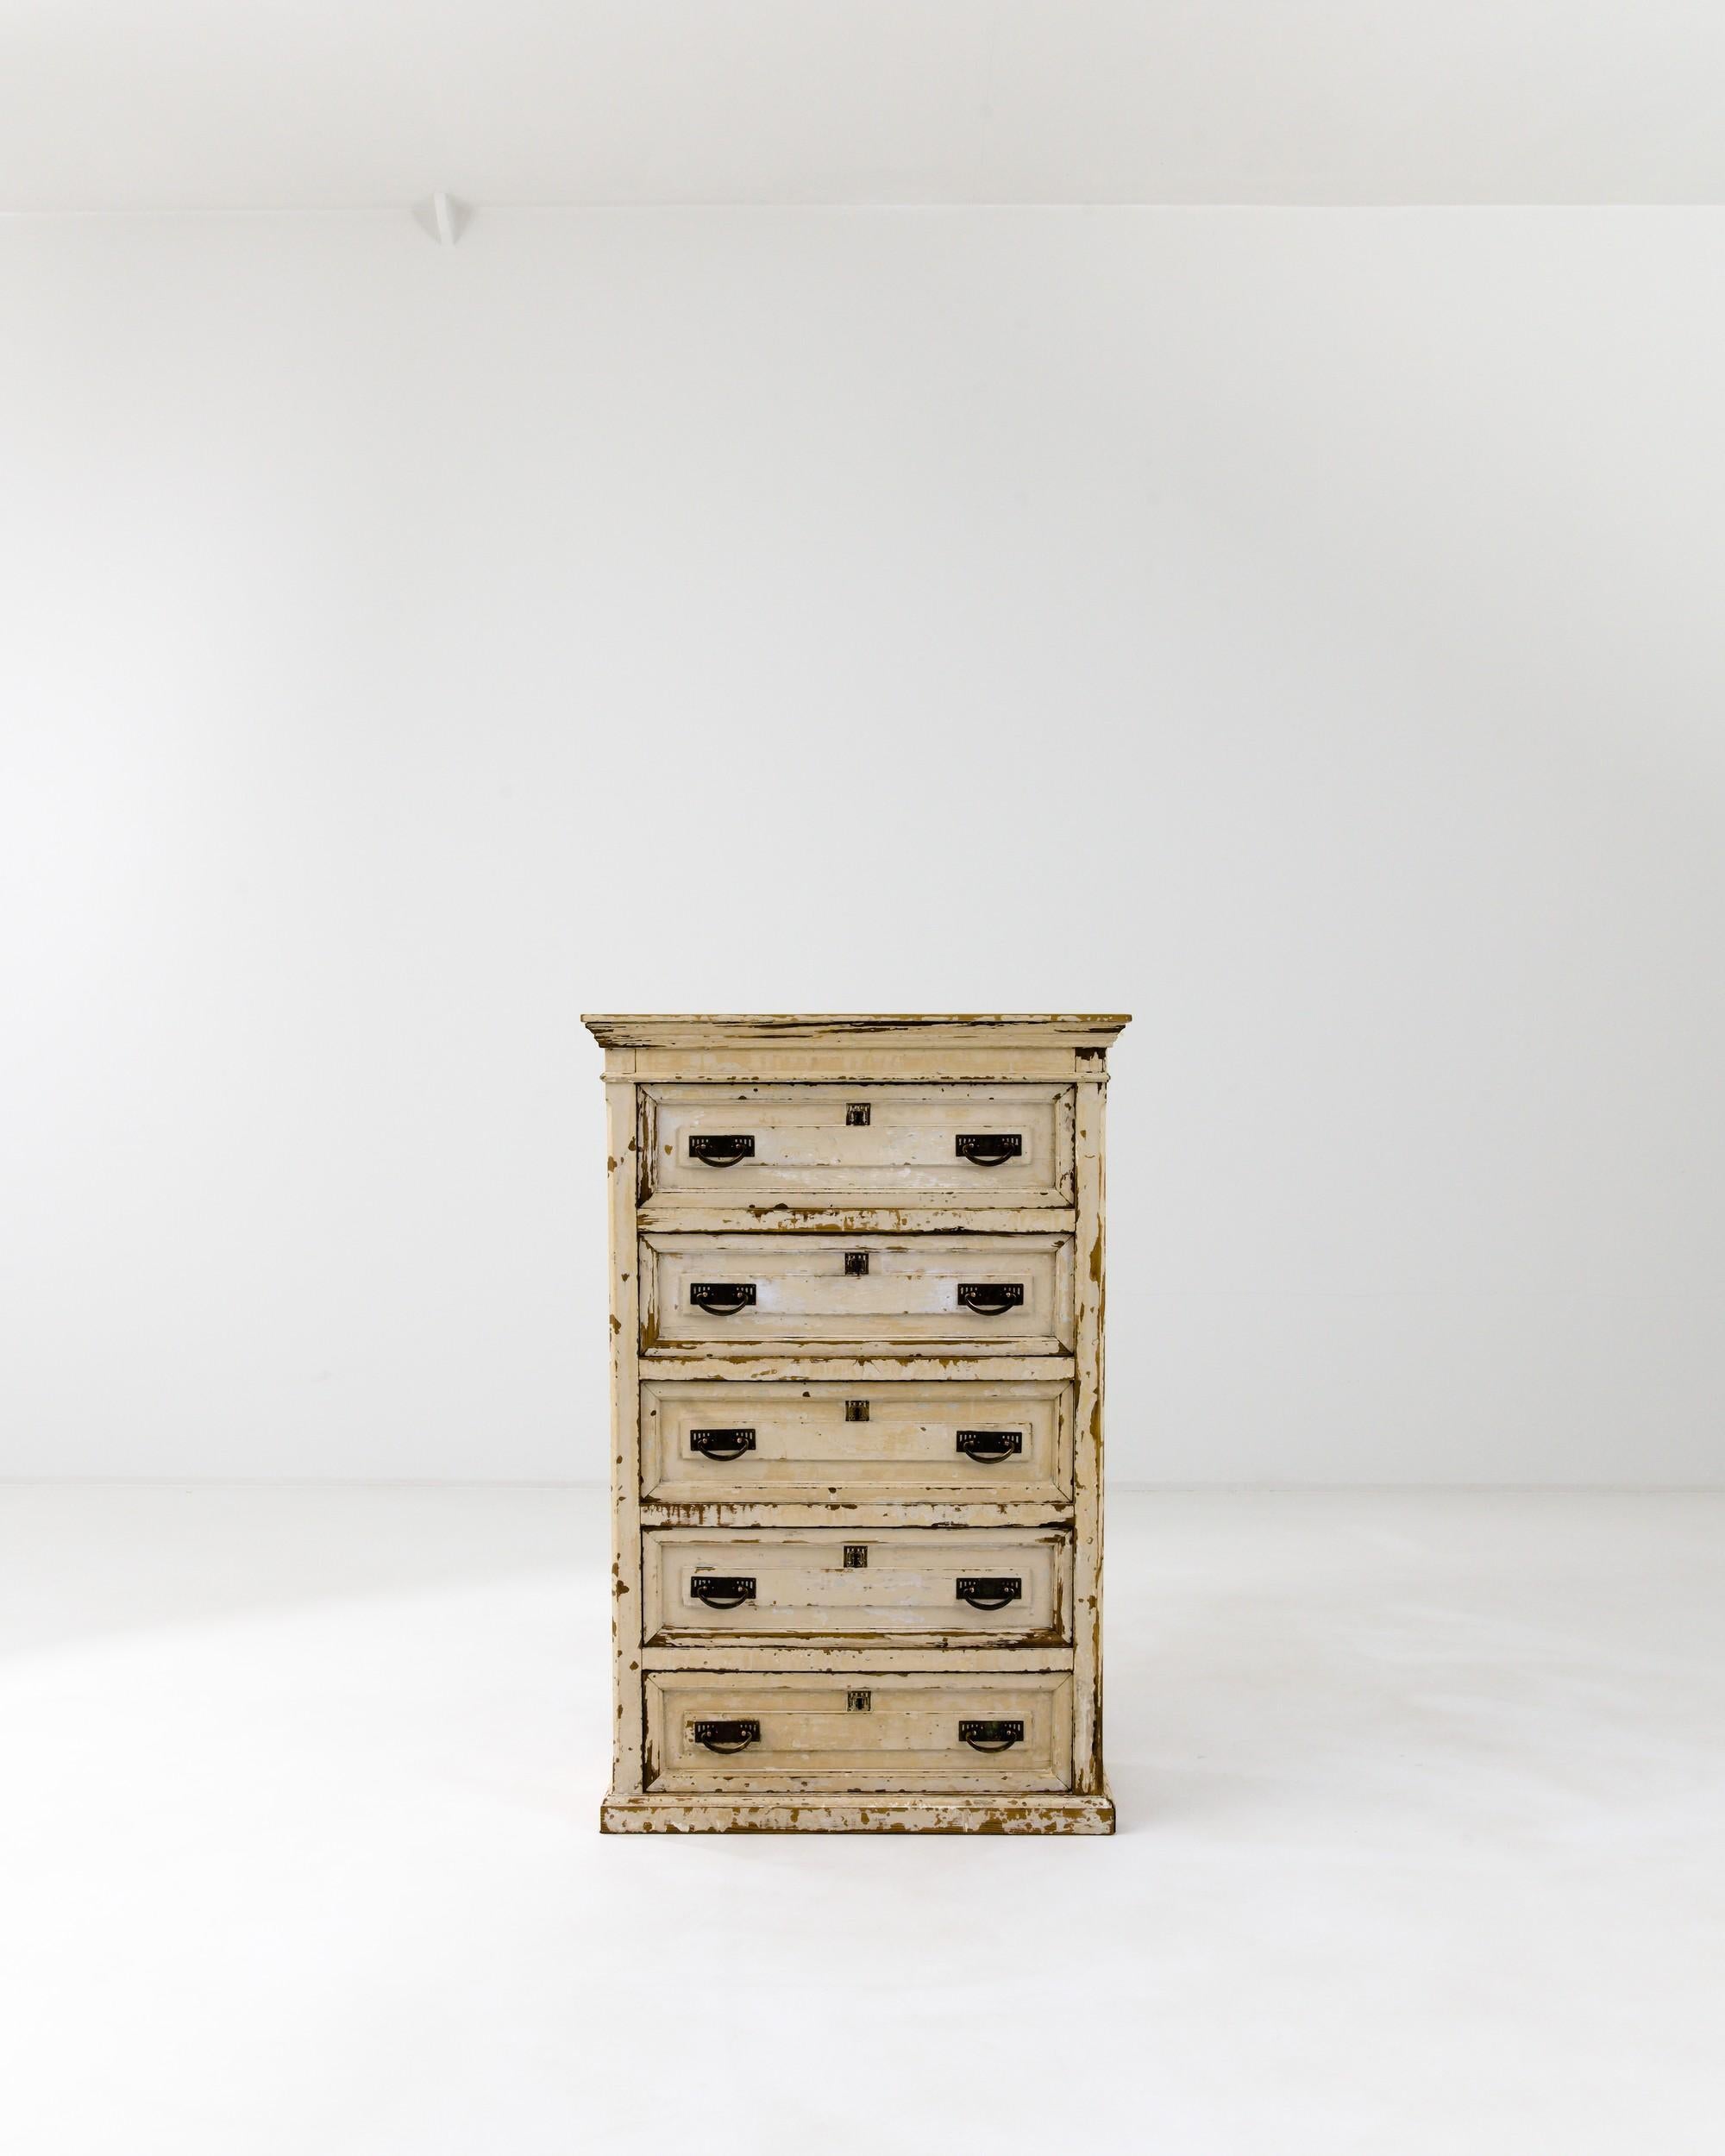 Resting solidly on its plinth base, this 19th-century French chest showcases five drawers equipped with bail pulls with rectangular backplates and square lock pieces.  The molded top accentuates the impeccable geometry of the bureau, while a gently